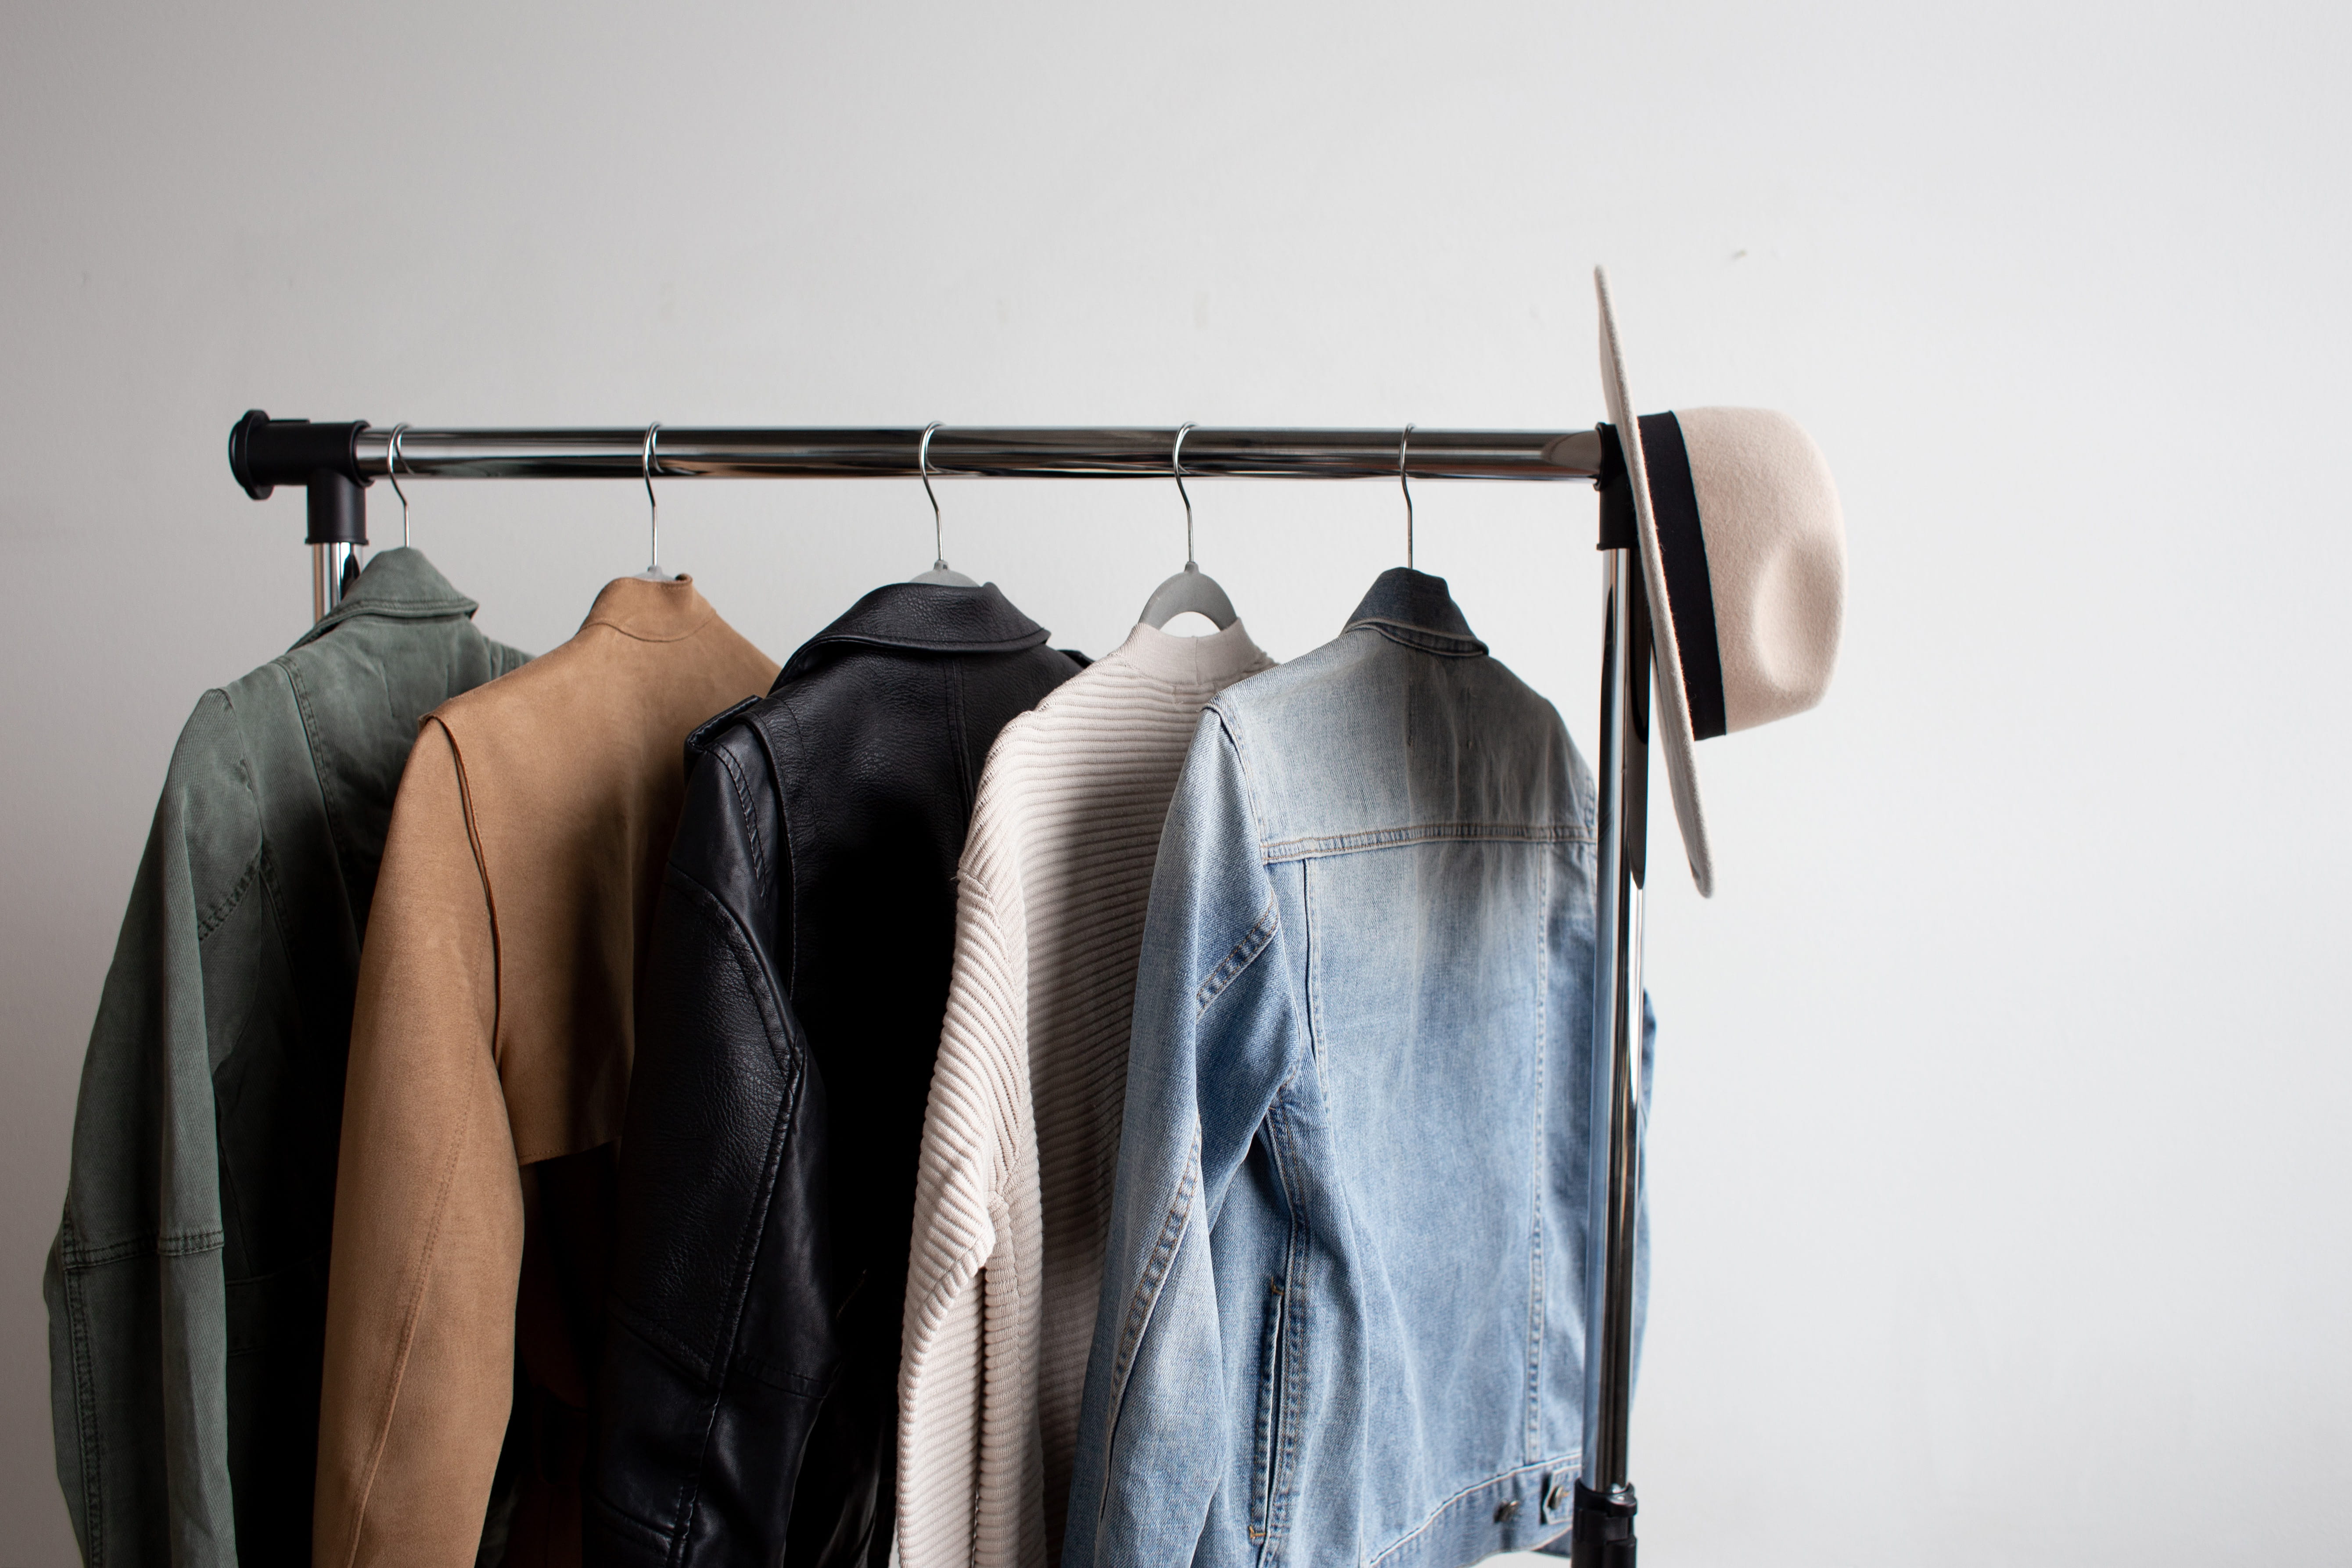 one cowboy hat and five jackets hanged on clothes rack, clothing